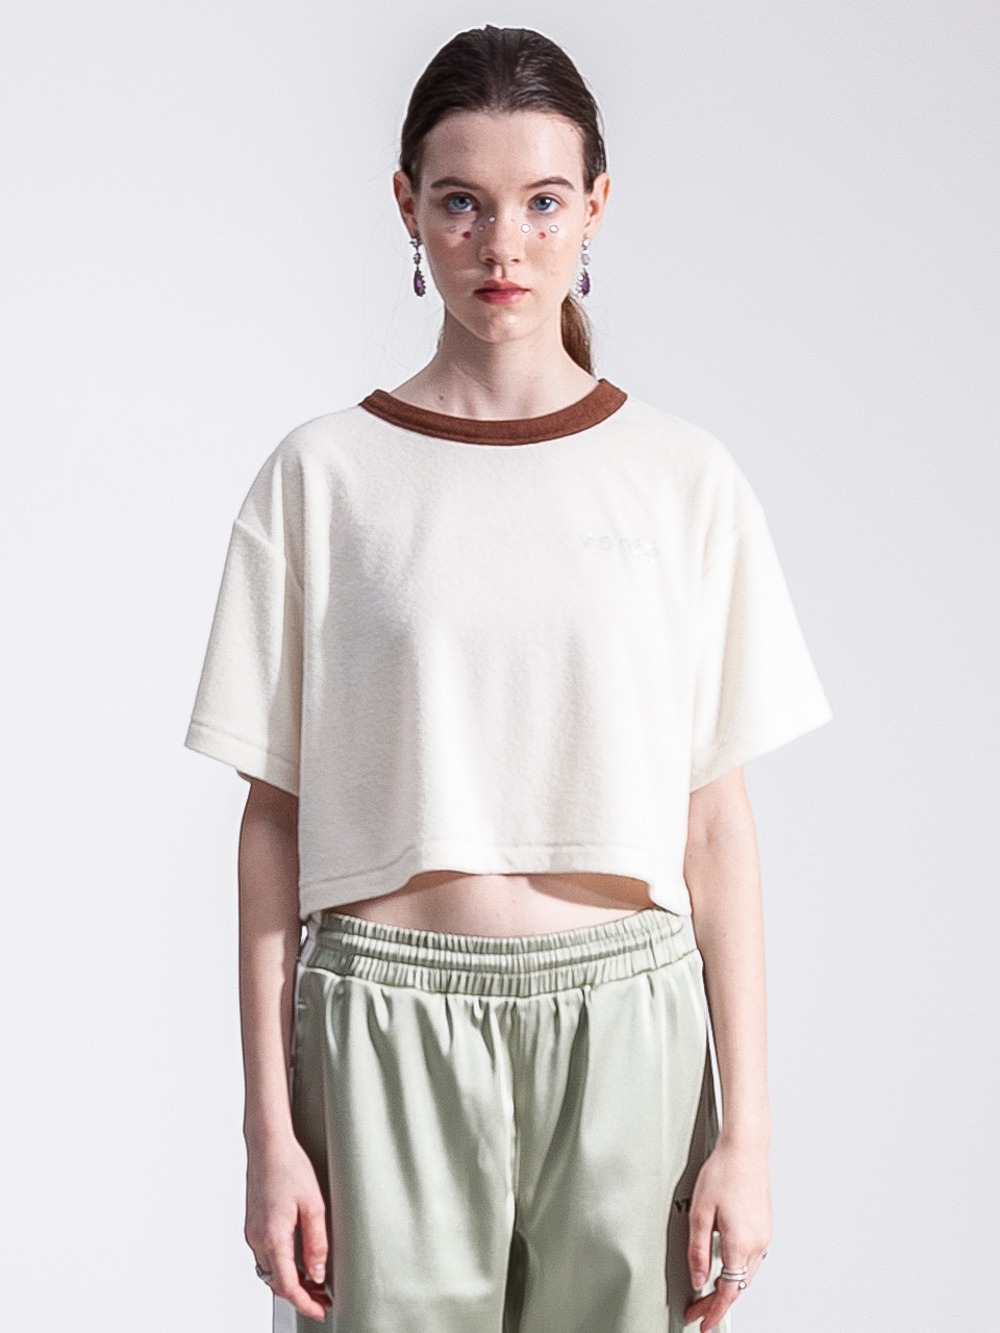 [SAMPLE SALE] Terry cropped t-shirt in color-block -70%